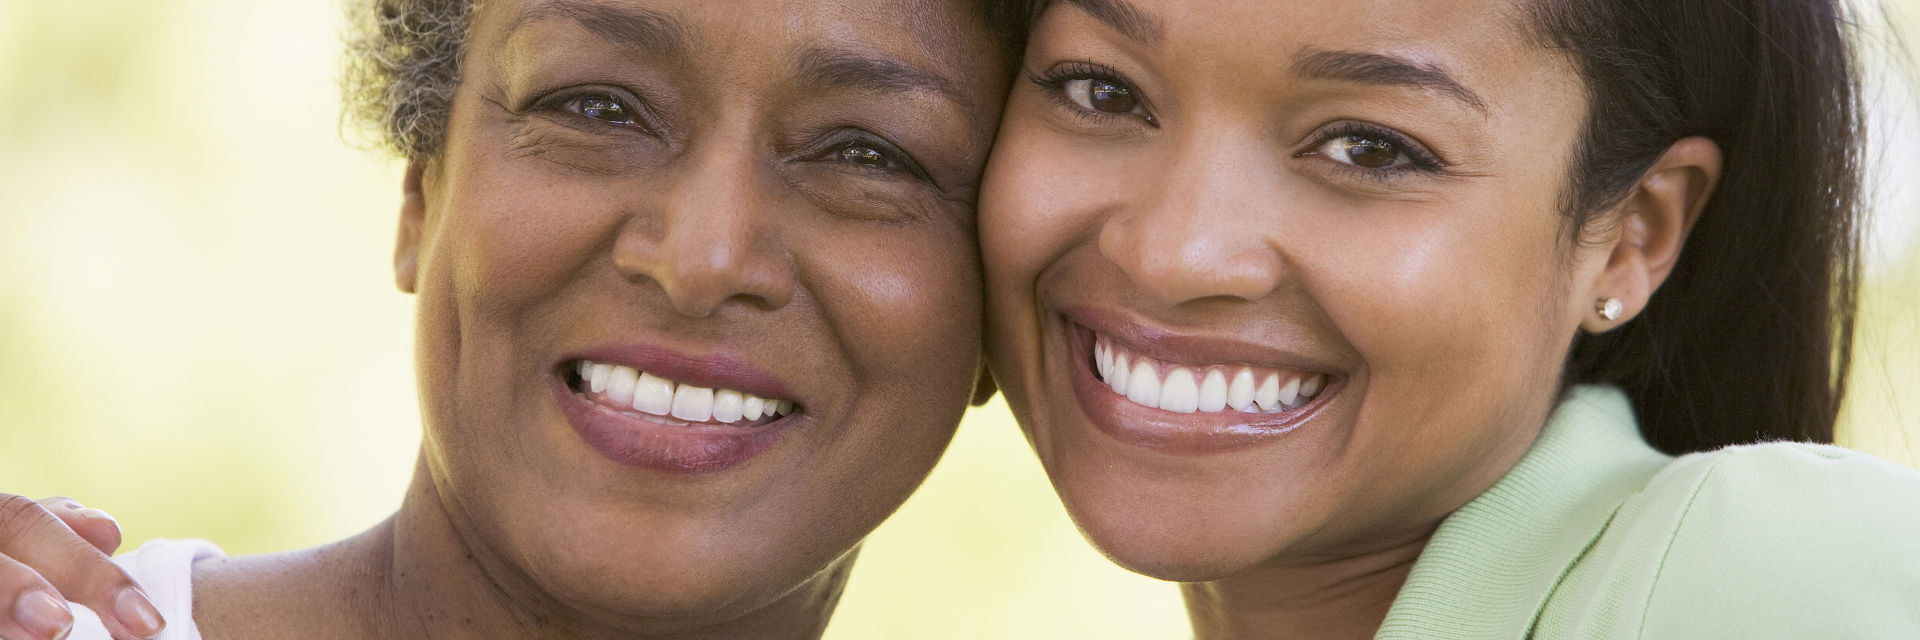 A senior Afro-American woman and her daughter showing perfect teeth in their smiles.